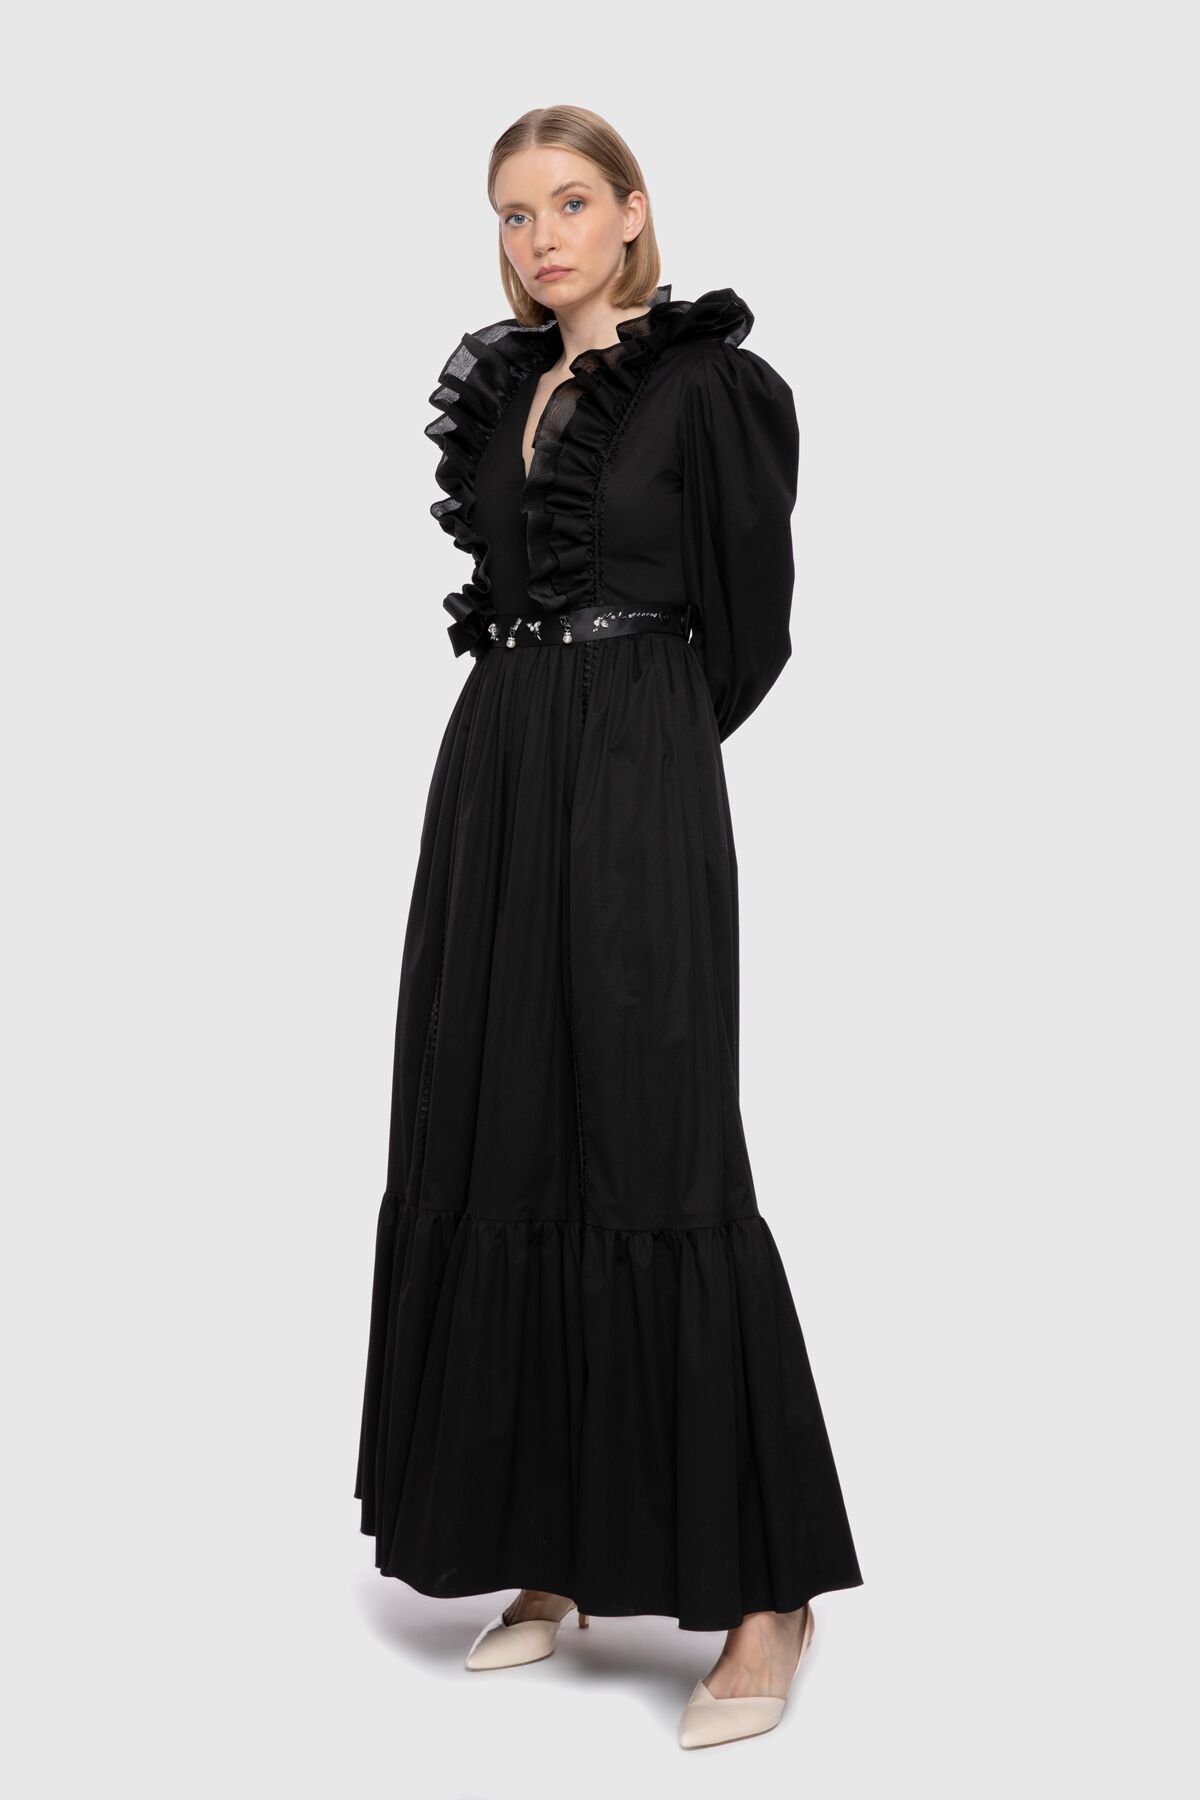 Front Frill And Accessory Detail Long Black Dress